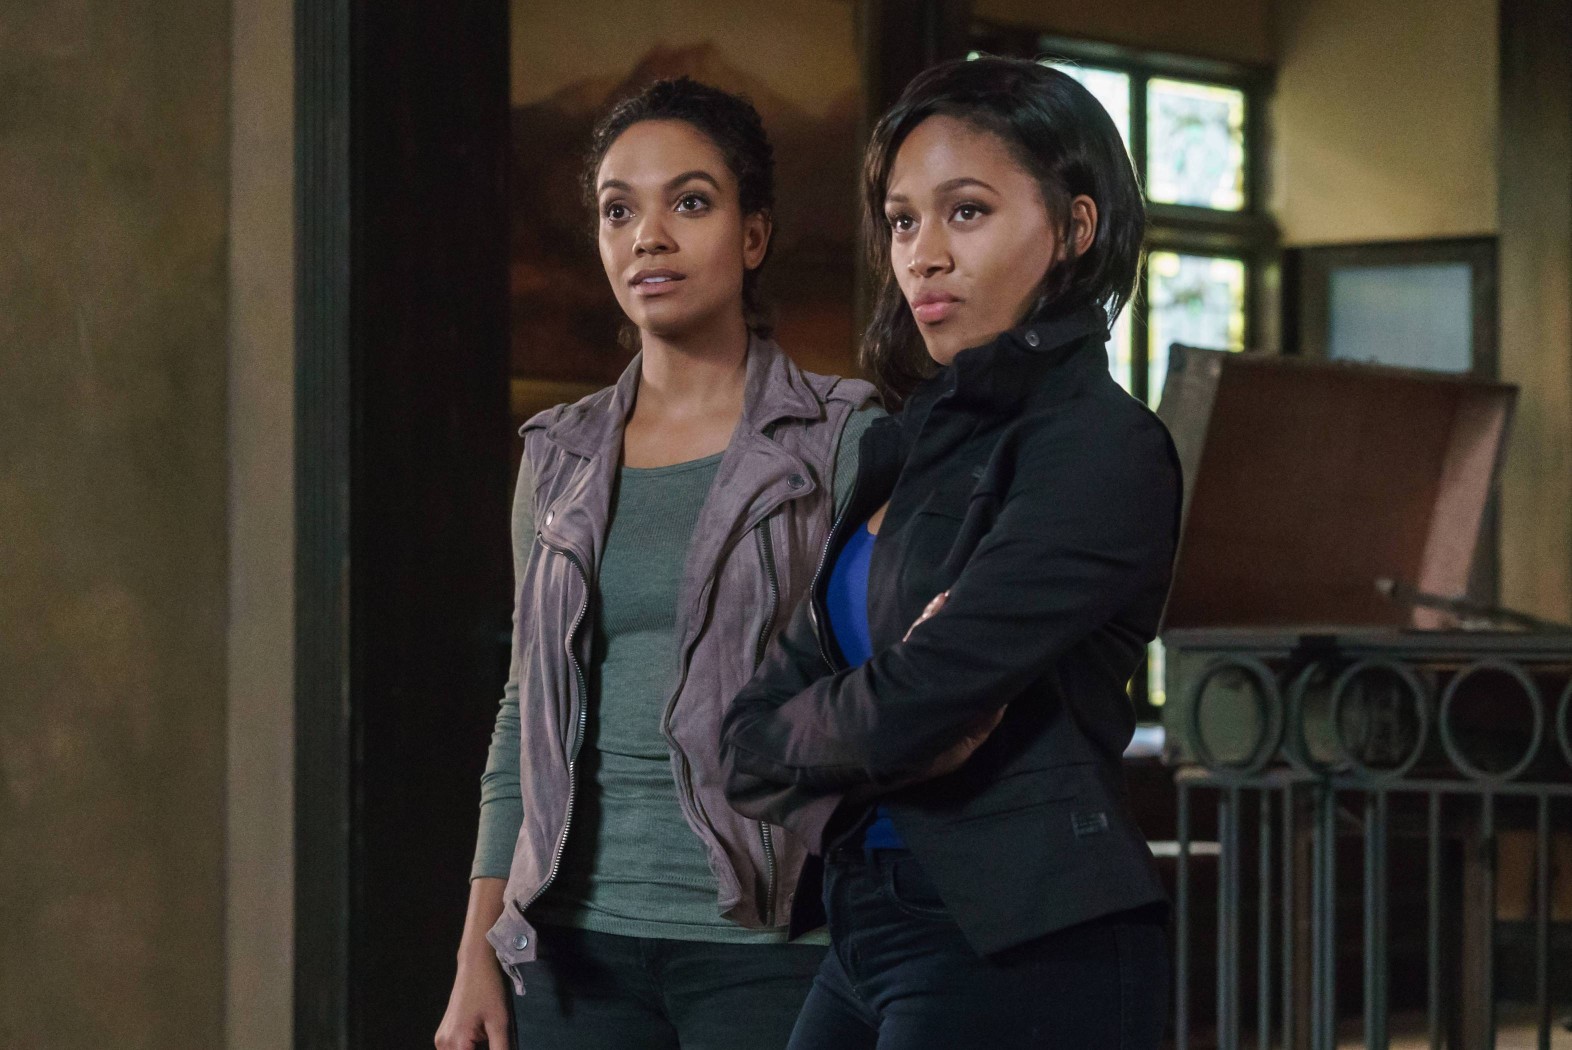 SLEEPY HOLLOW: L-R: Lyndie Greenwood and Nicole Beharie in the "The Sister Mills" episode of SLEEPY HOLLOW airing Thursday, Oct. 22 (9:00-10:00 PM ET/PT) on FOX. ©2015 Fox Broadcasting Co. CR: Tina Rowden/FOX